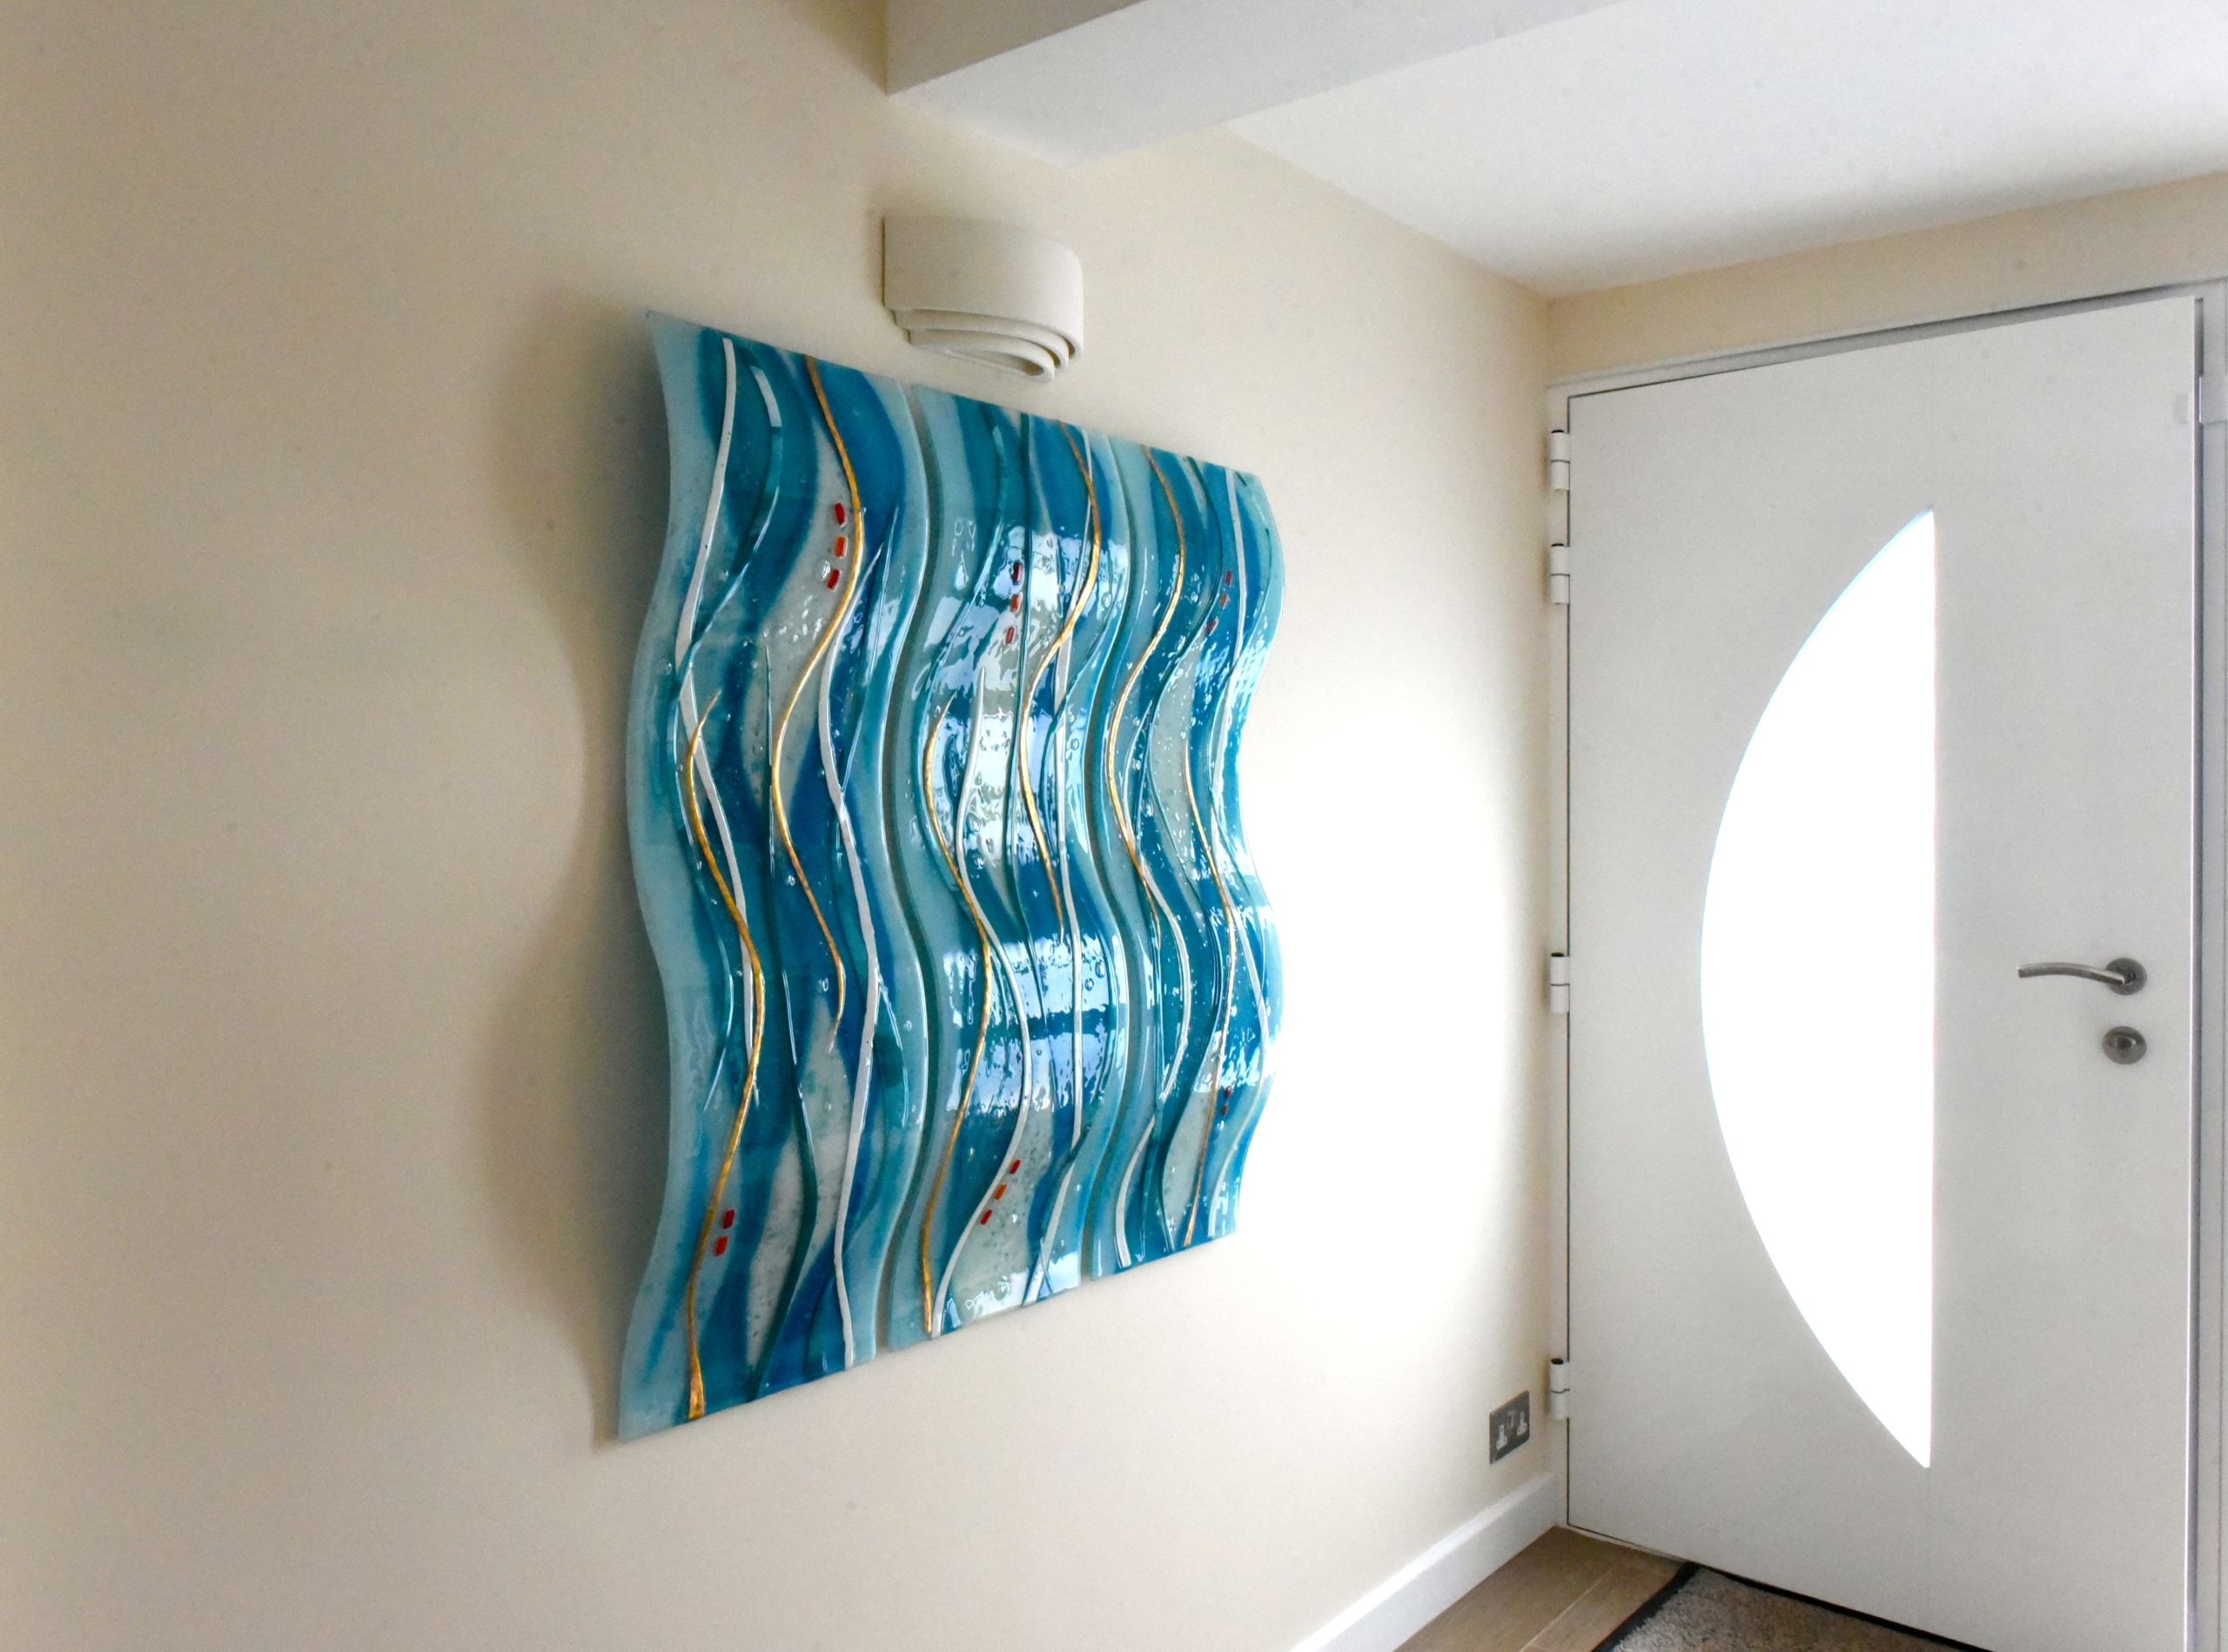 Wall Waves | Bespoke Glass Wall Art | House Of Ugly Fish Inside Waves Wall Art (View 14 of 15)